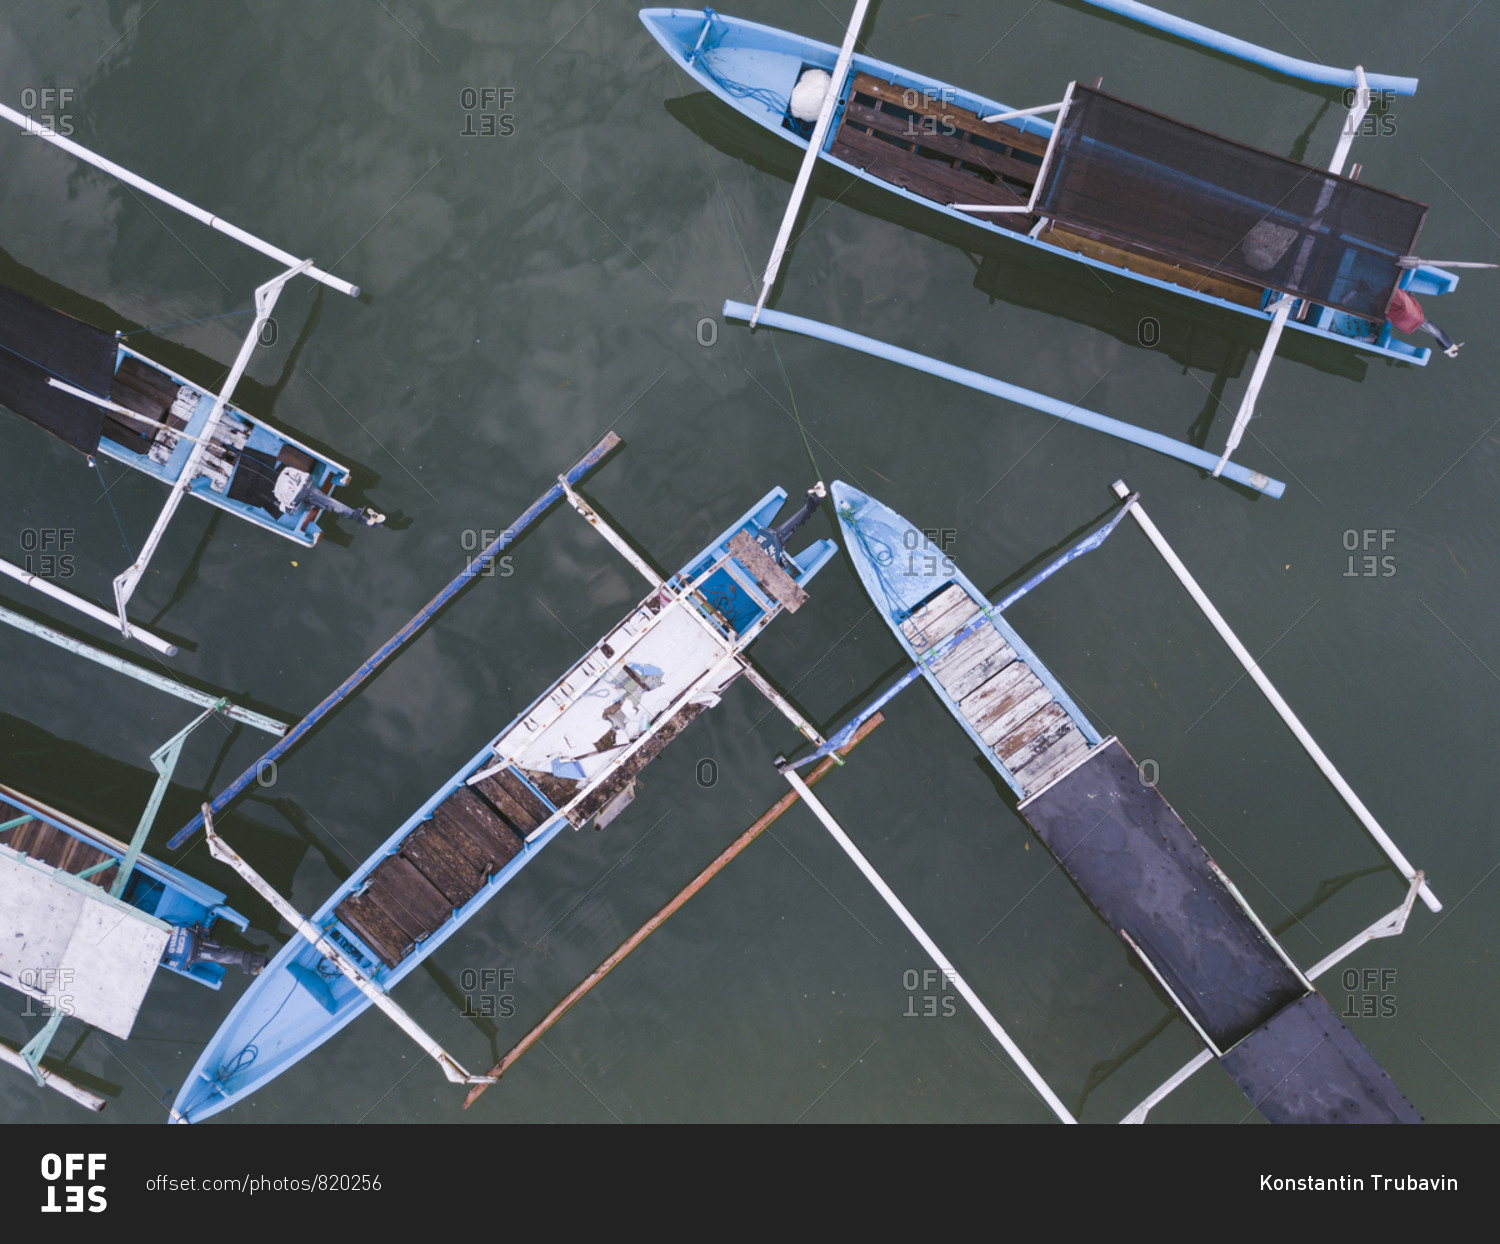 Banca boats in the ocean from above